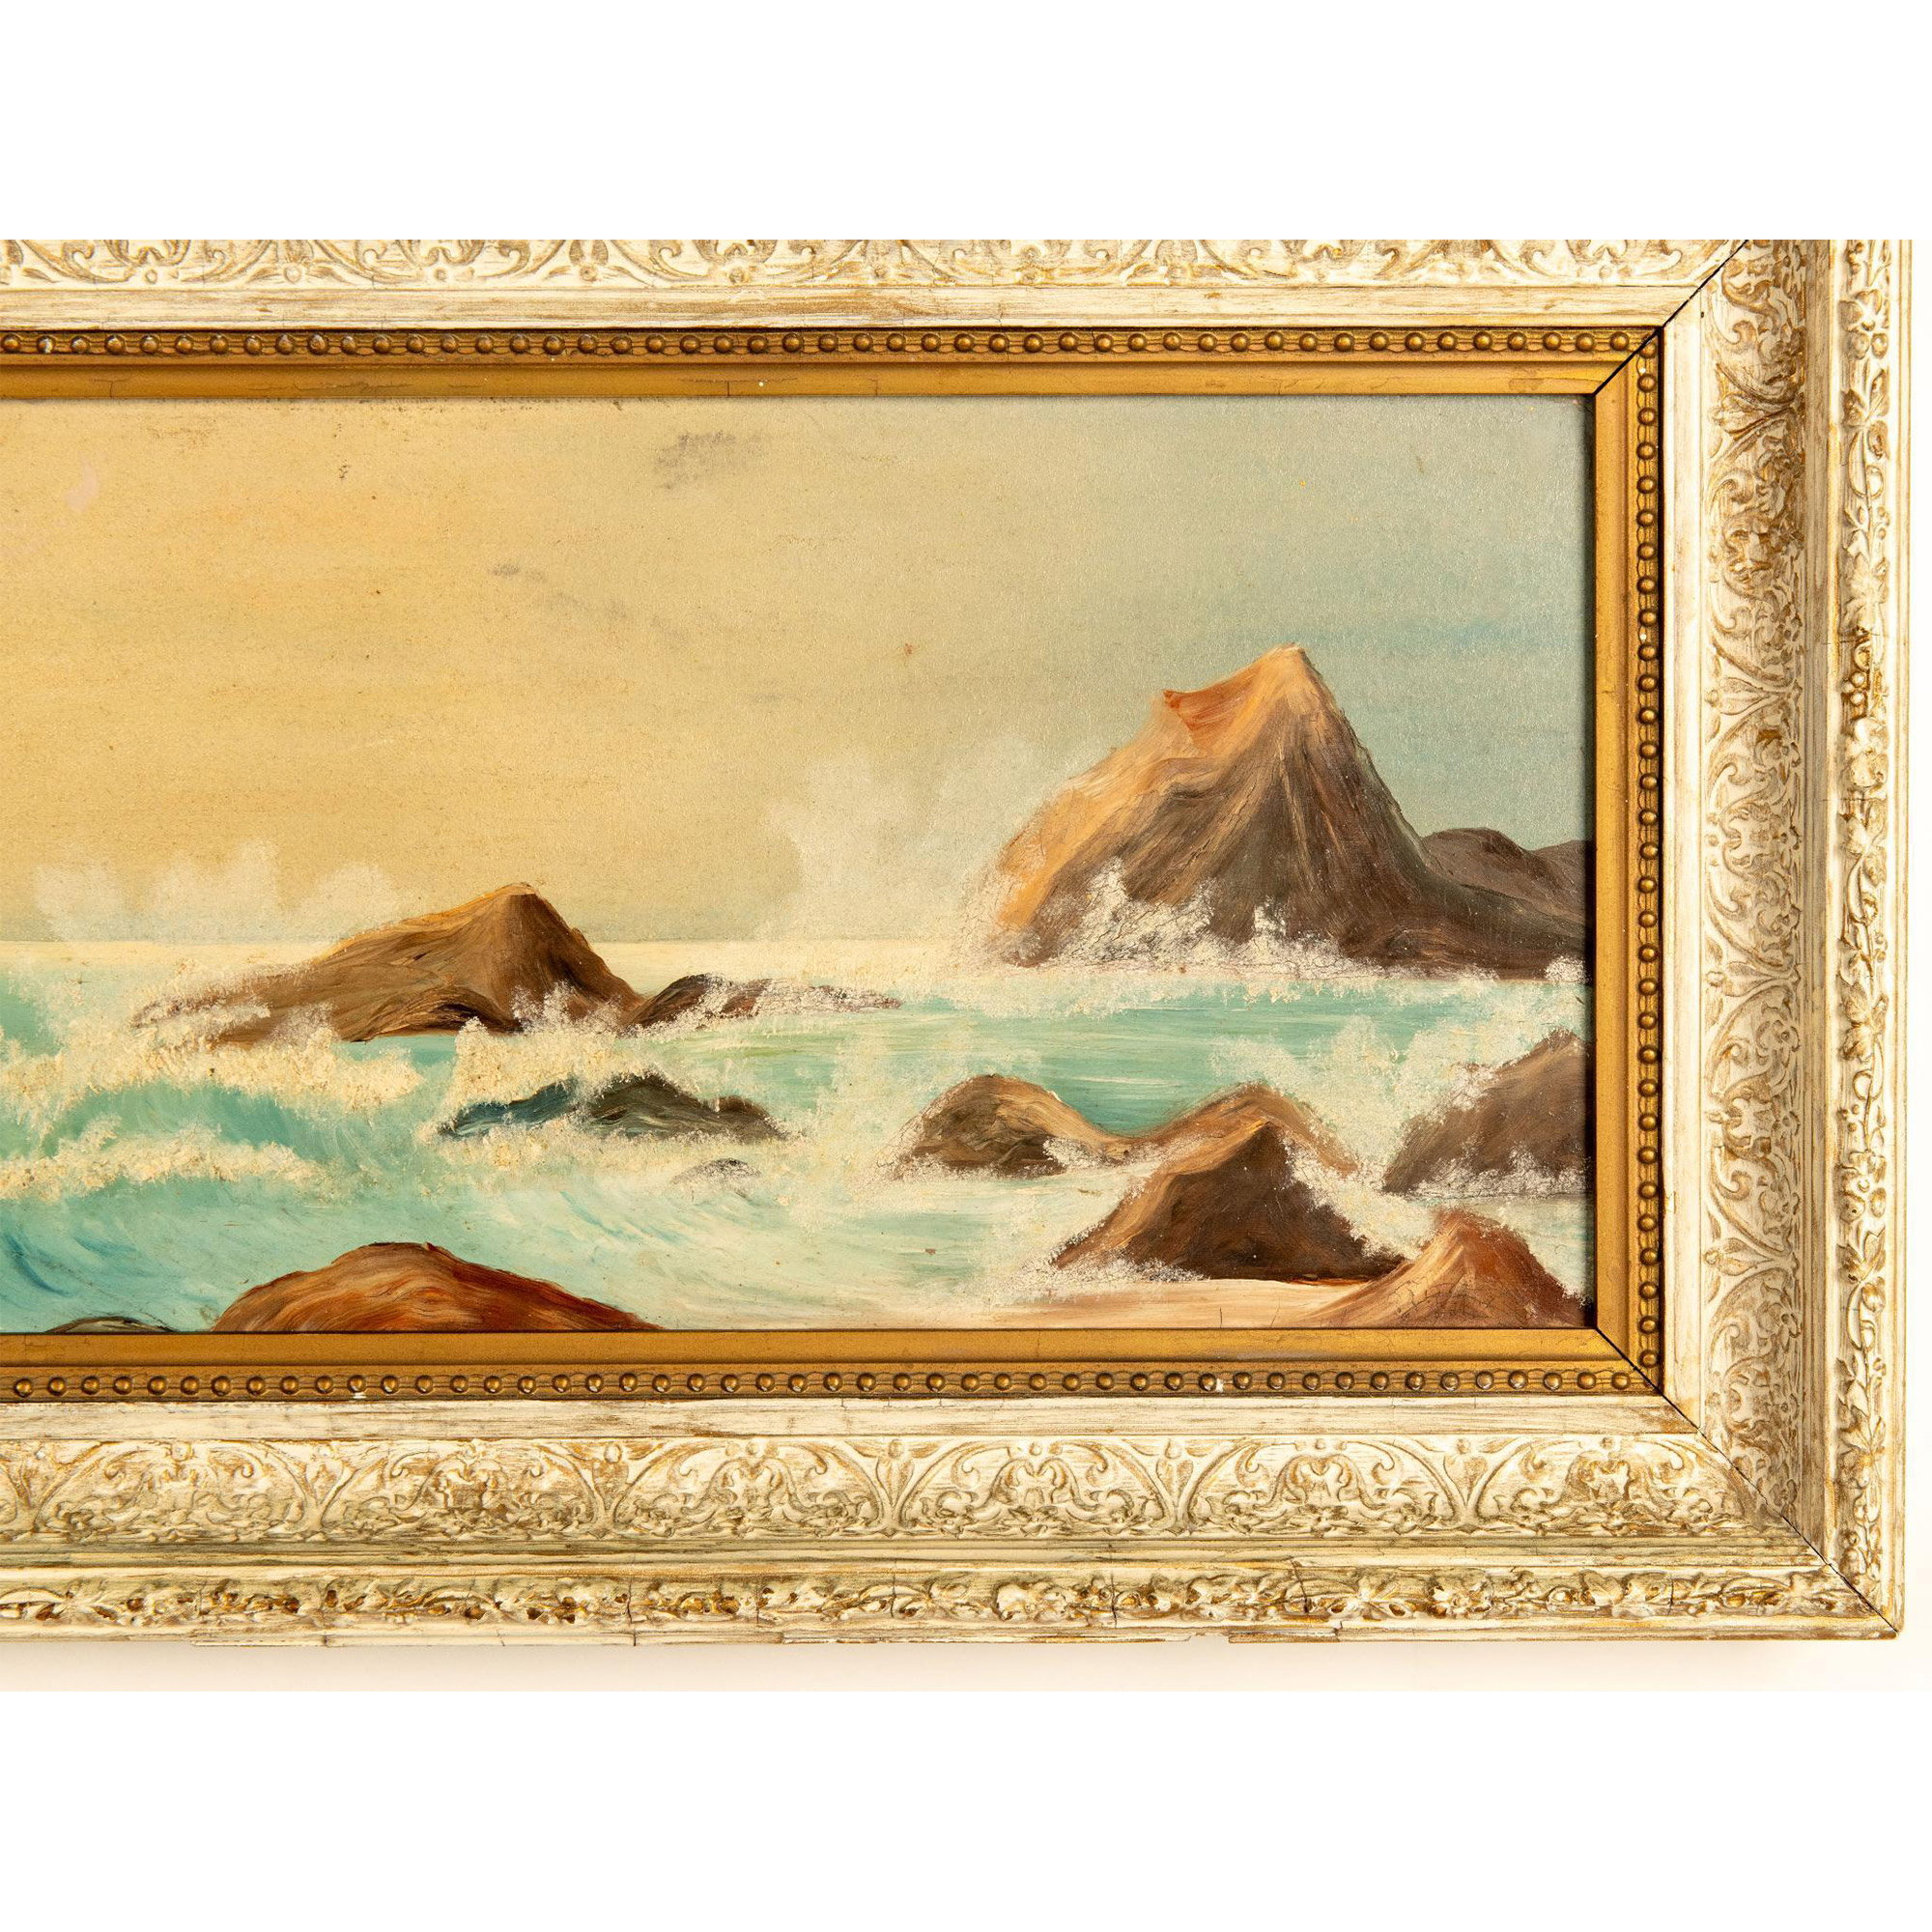 Original Panoramic Size Oil on Board, Pacific Ocean Seascape - Image 4 of 6